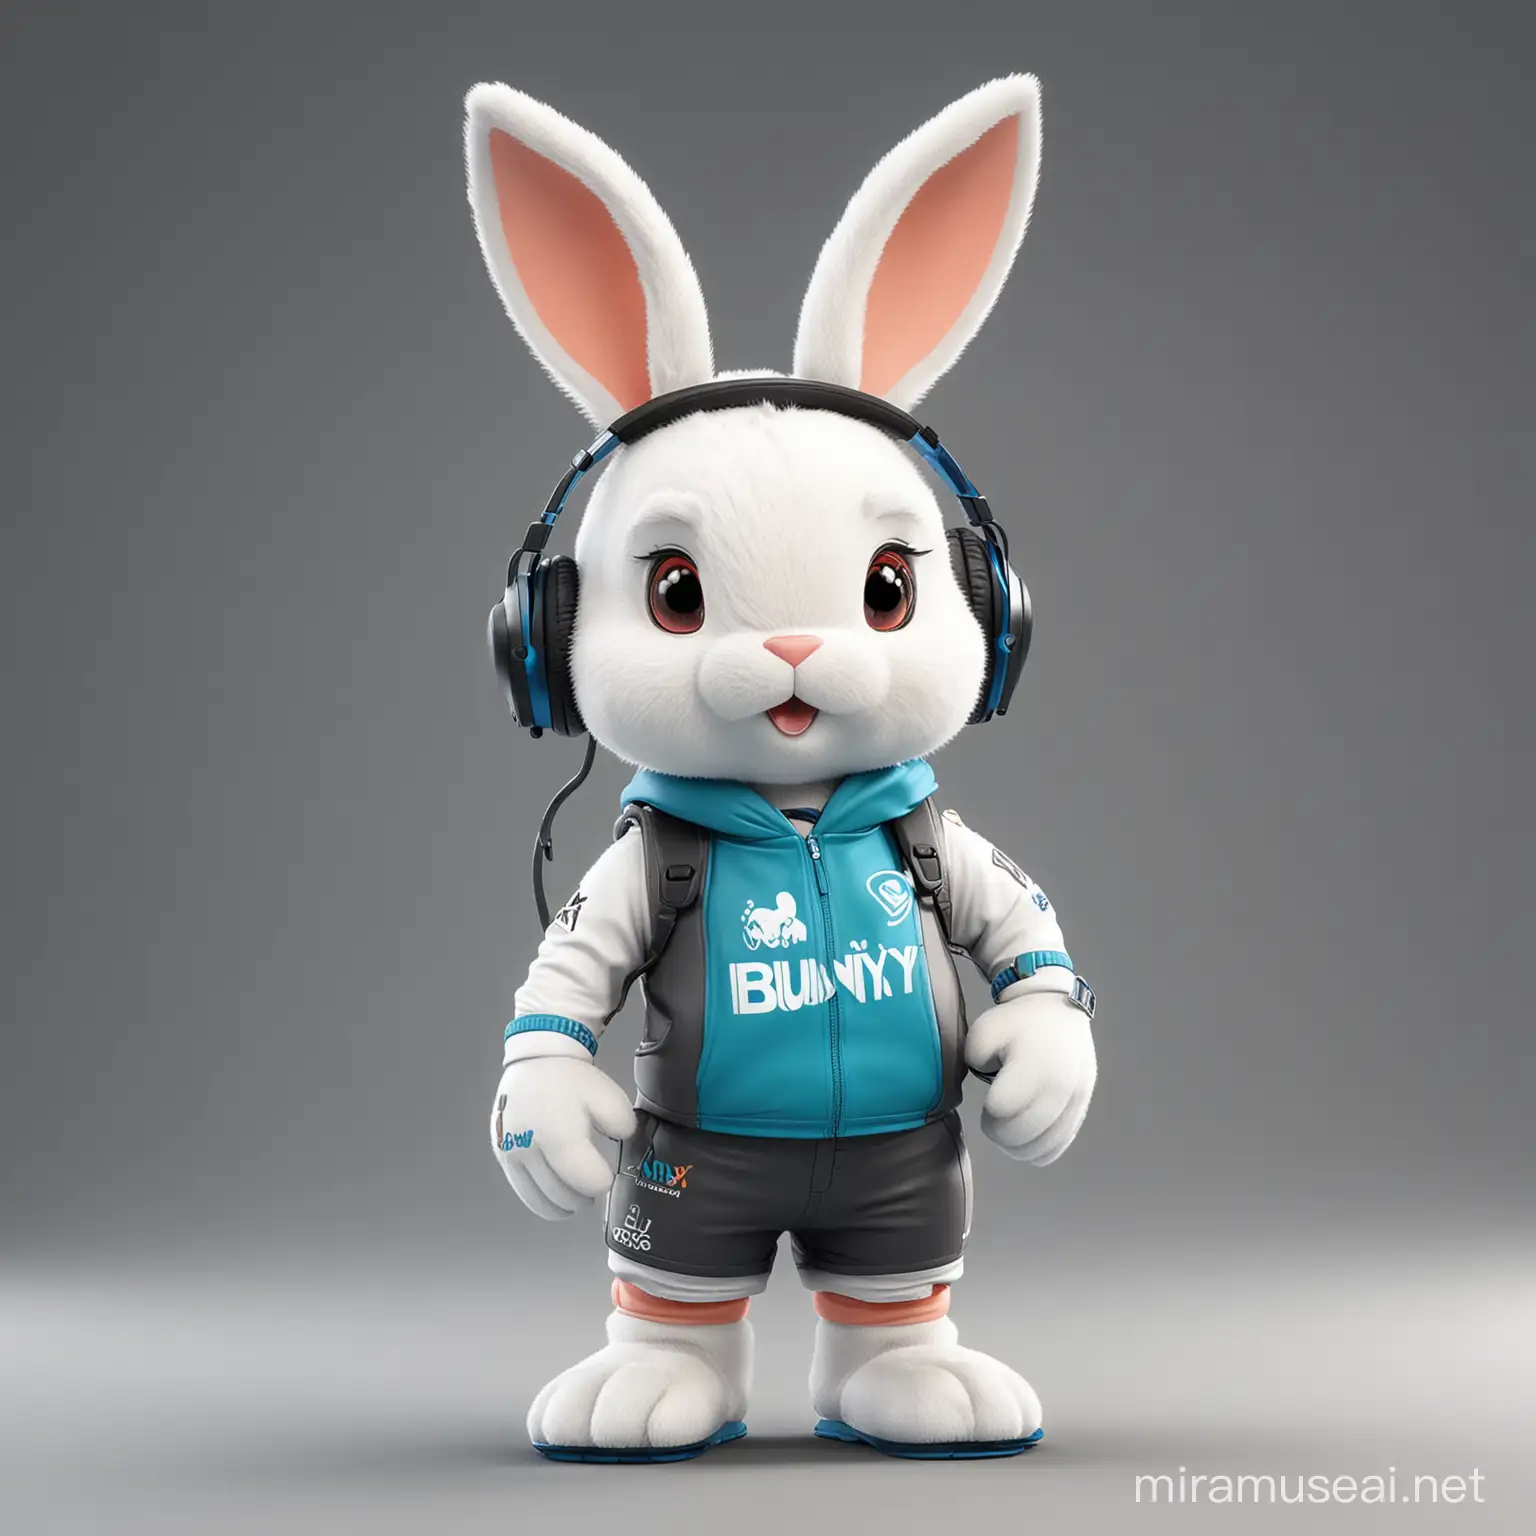 logo, bunny, mascot, sport, have full body bunny,  wear headphone, caster, 35 degree inclined surface, motivate